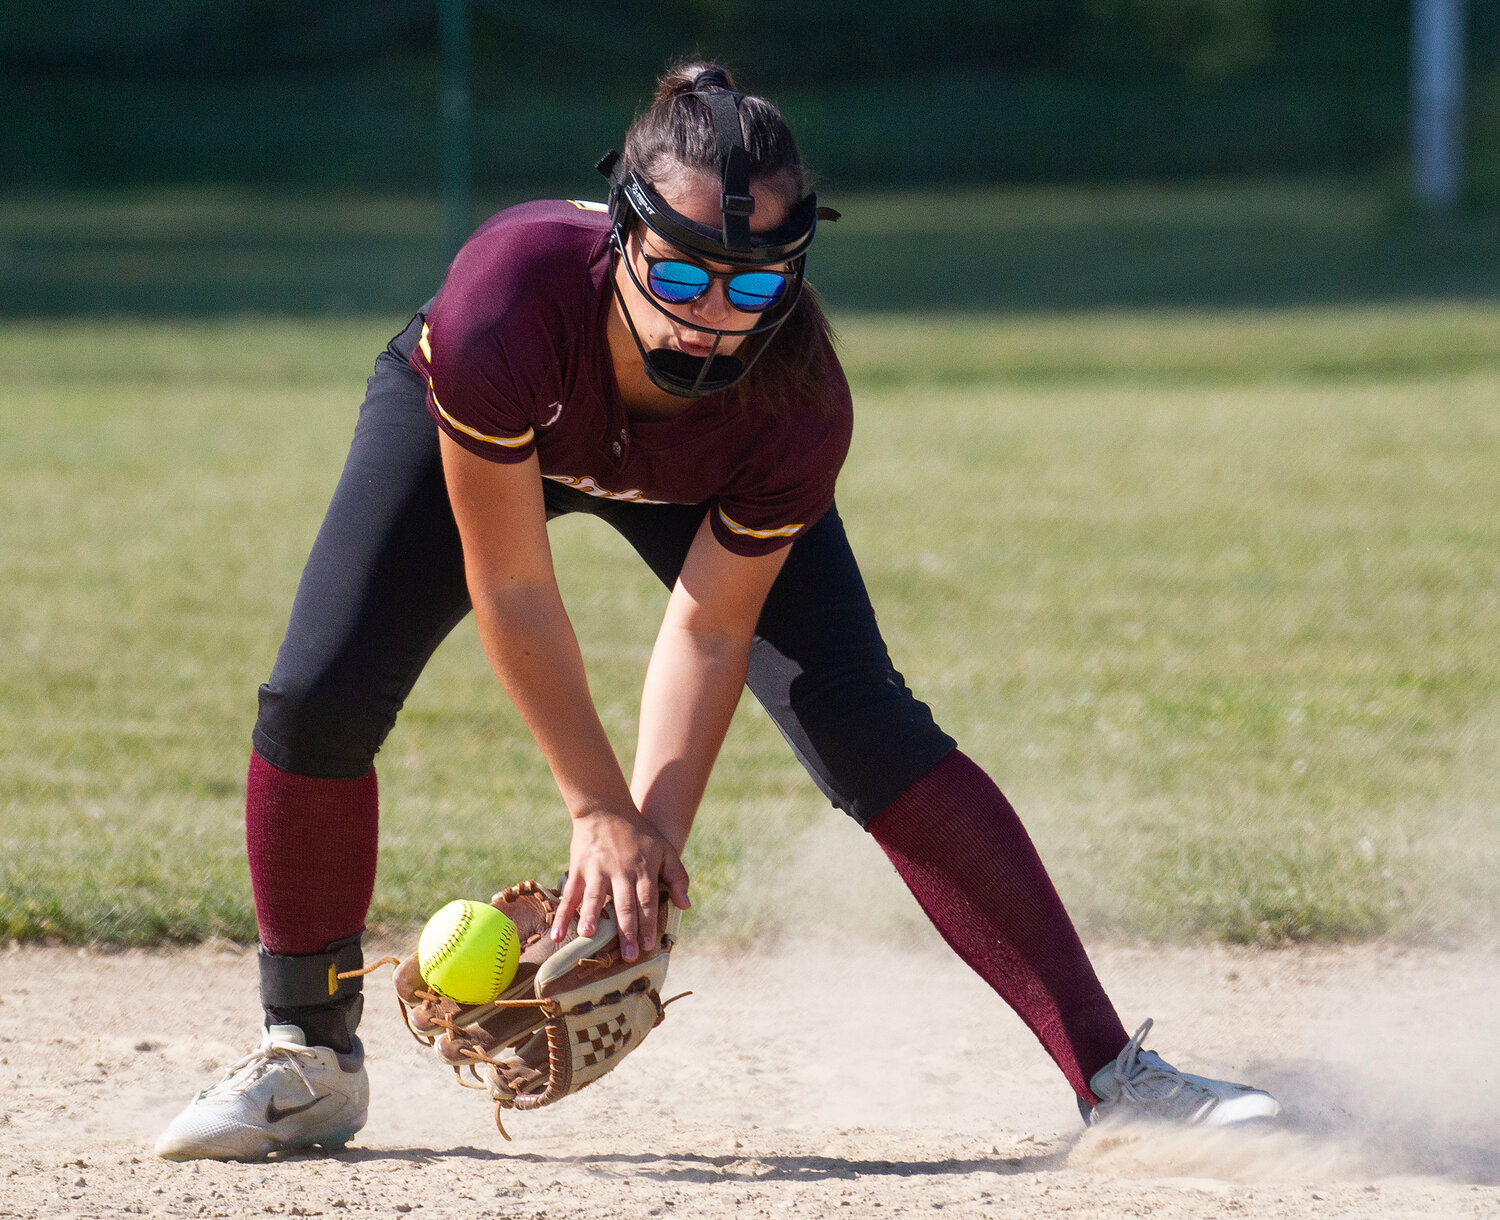 Mackenzie Oliveira scoops up a grounder during the game.